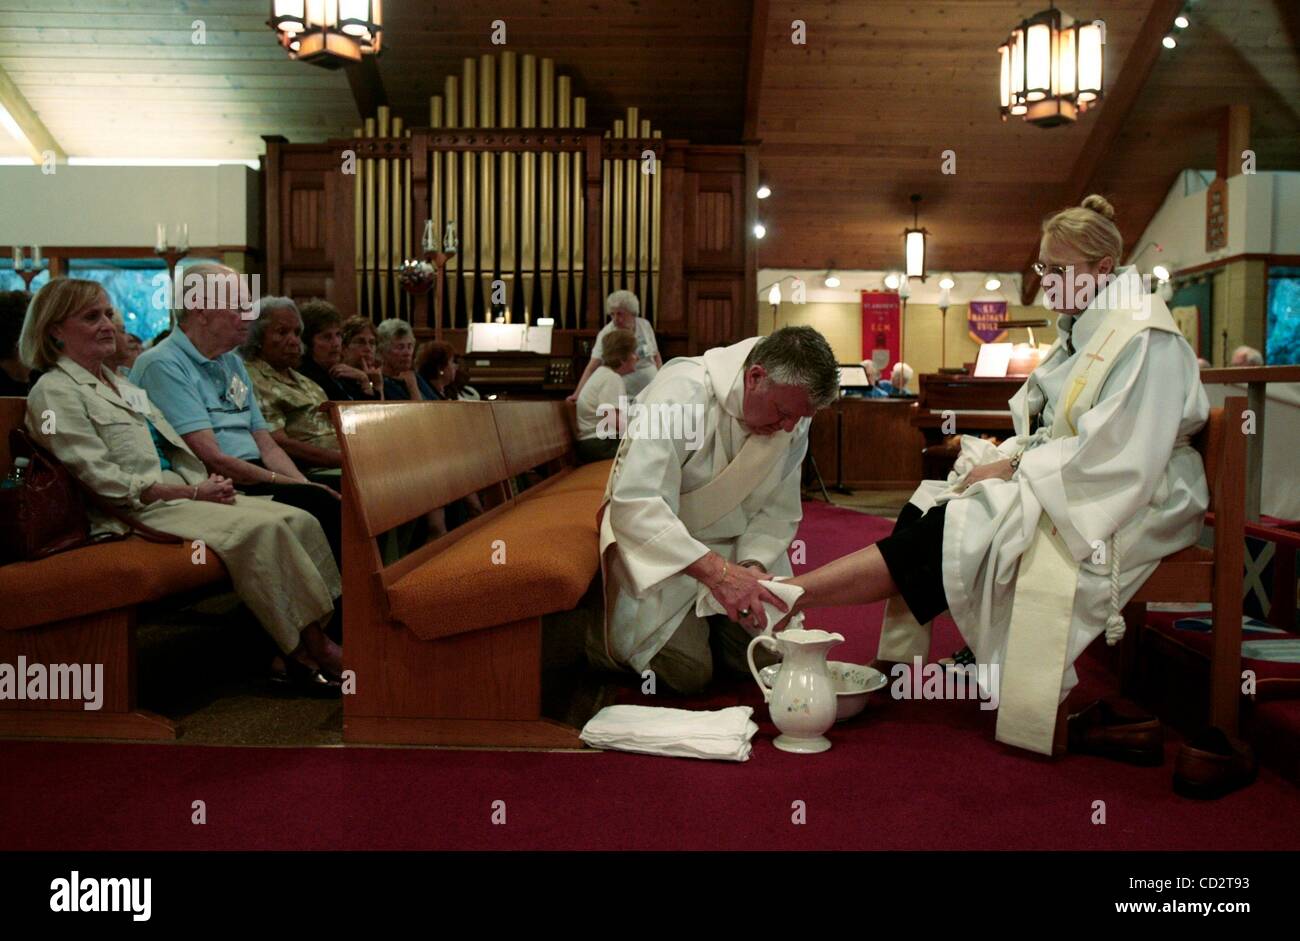 Mar 20, 2008 - Spring Hill, Florida, USA - Deacon LUDWIG WALLNER. 66, washes the feet of SHANDA MAHURIN, 57, priest at St. Andrews Episcopal Church, during the church's Maundy Thursday celebration in Spring Hill. The Maundy Thursday celebration ties in to the remembrance of The Last Supper during Ho Stock Photo